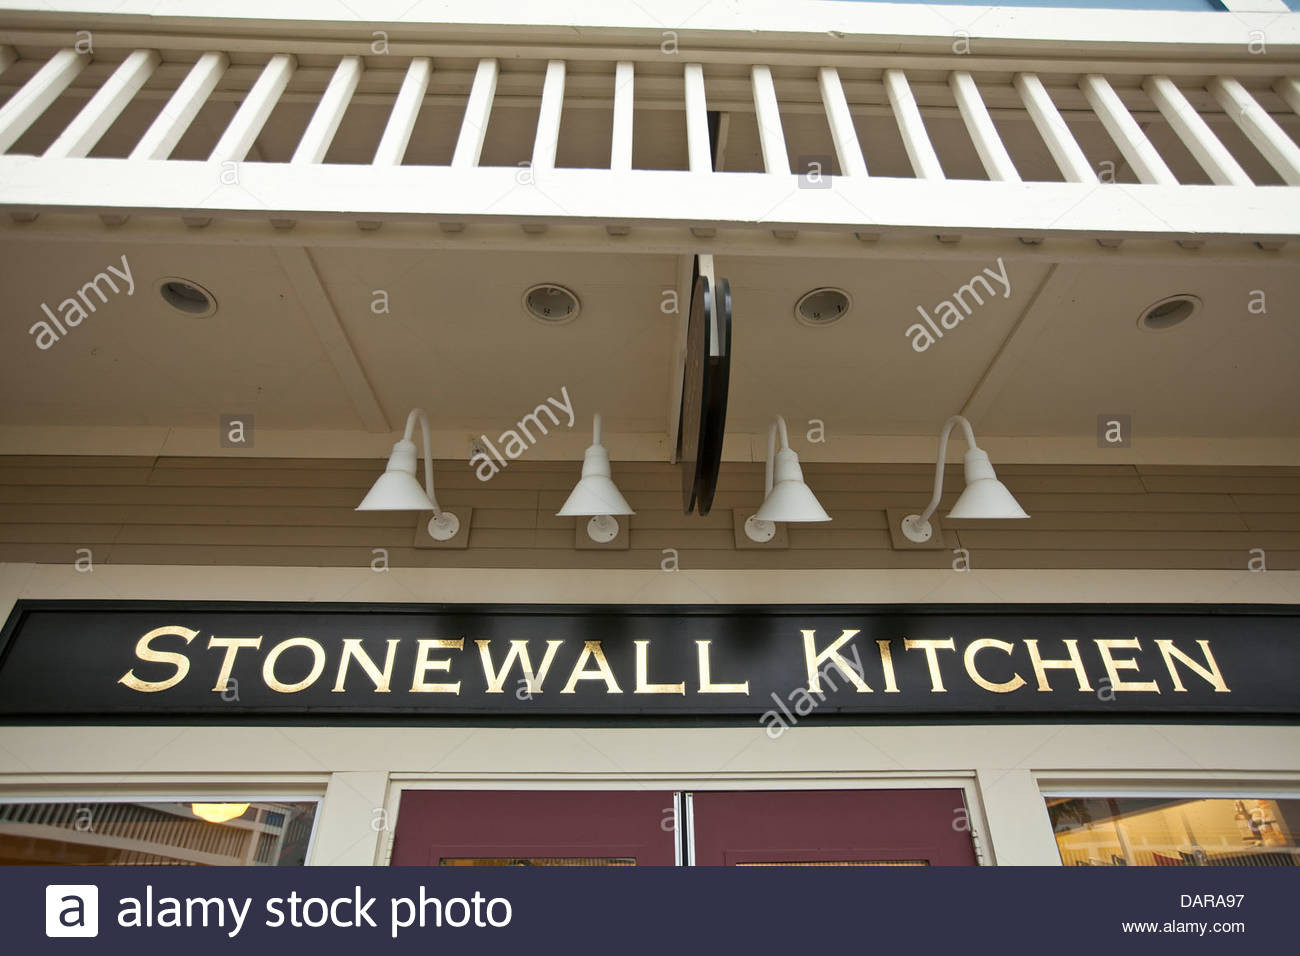 Stonewall Kitchen Stores
 A Stonewall Kitchen store is pictured at the Settlers